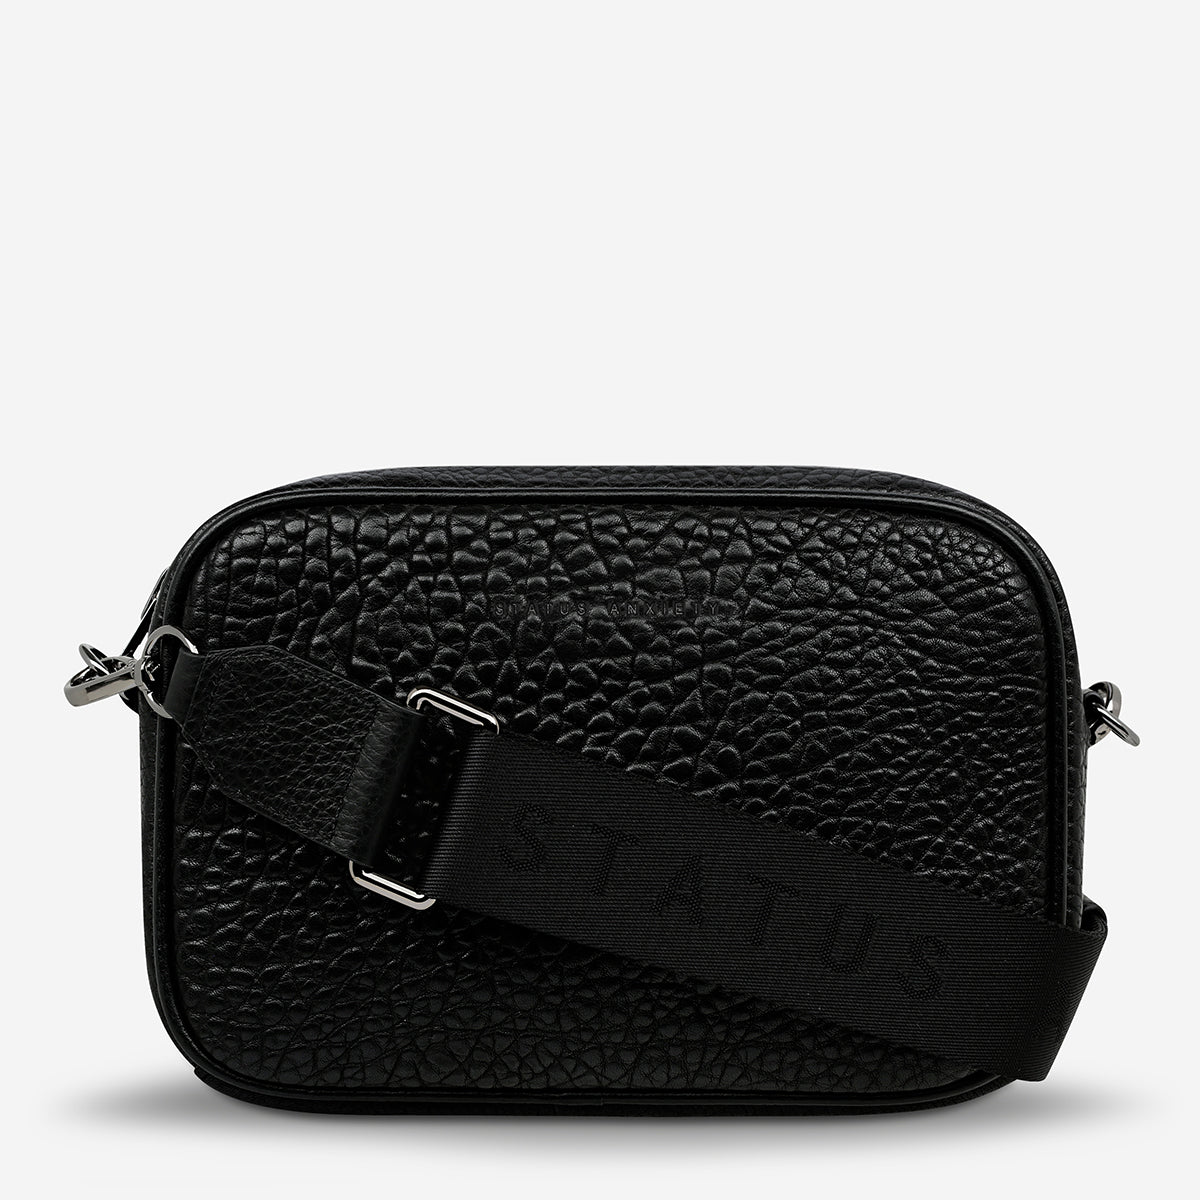 Plunder with Webbed Strap - Black Bubble